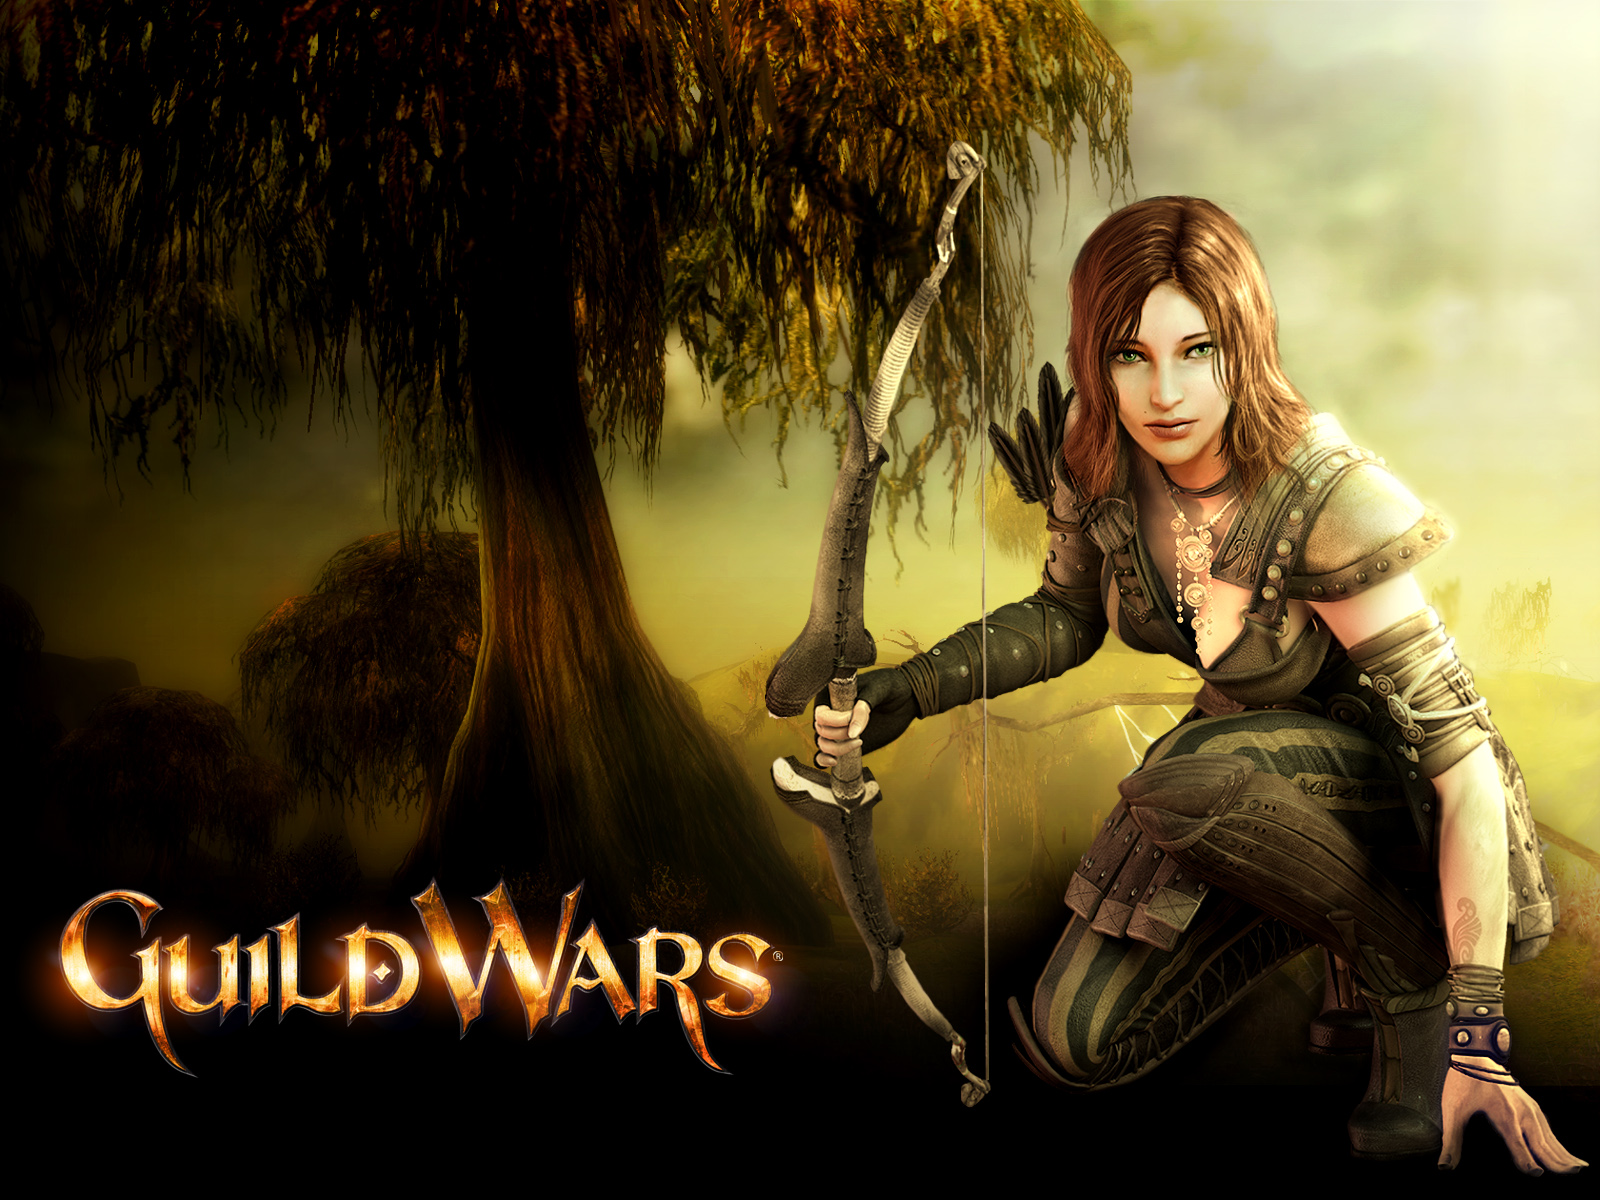 Latest Screens : Guild Wars Wallpapers